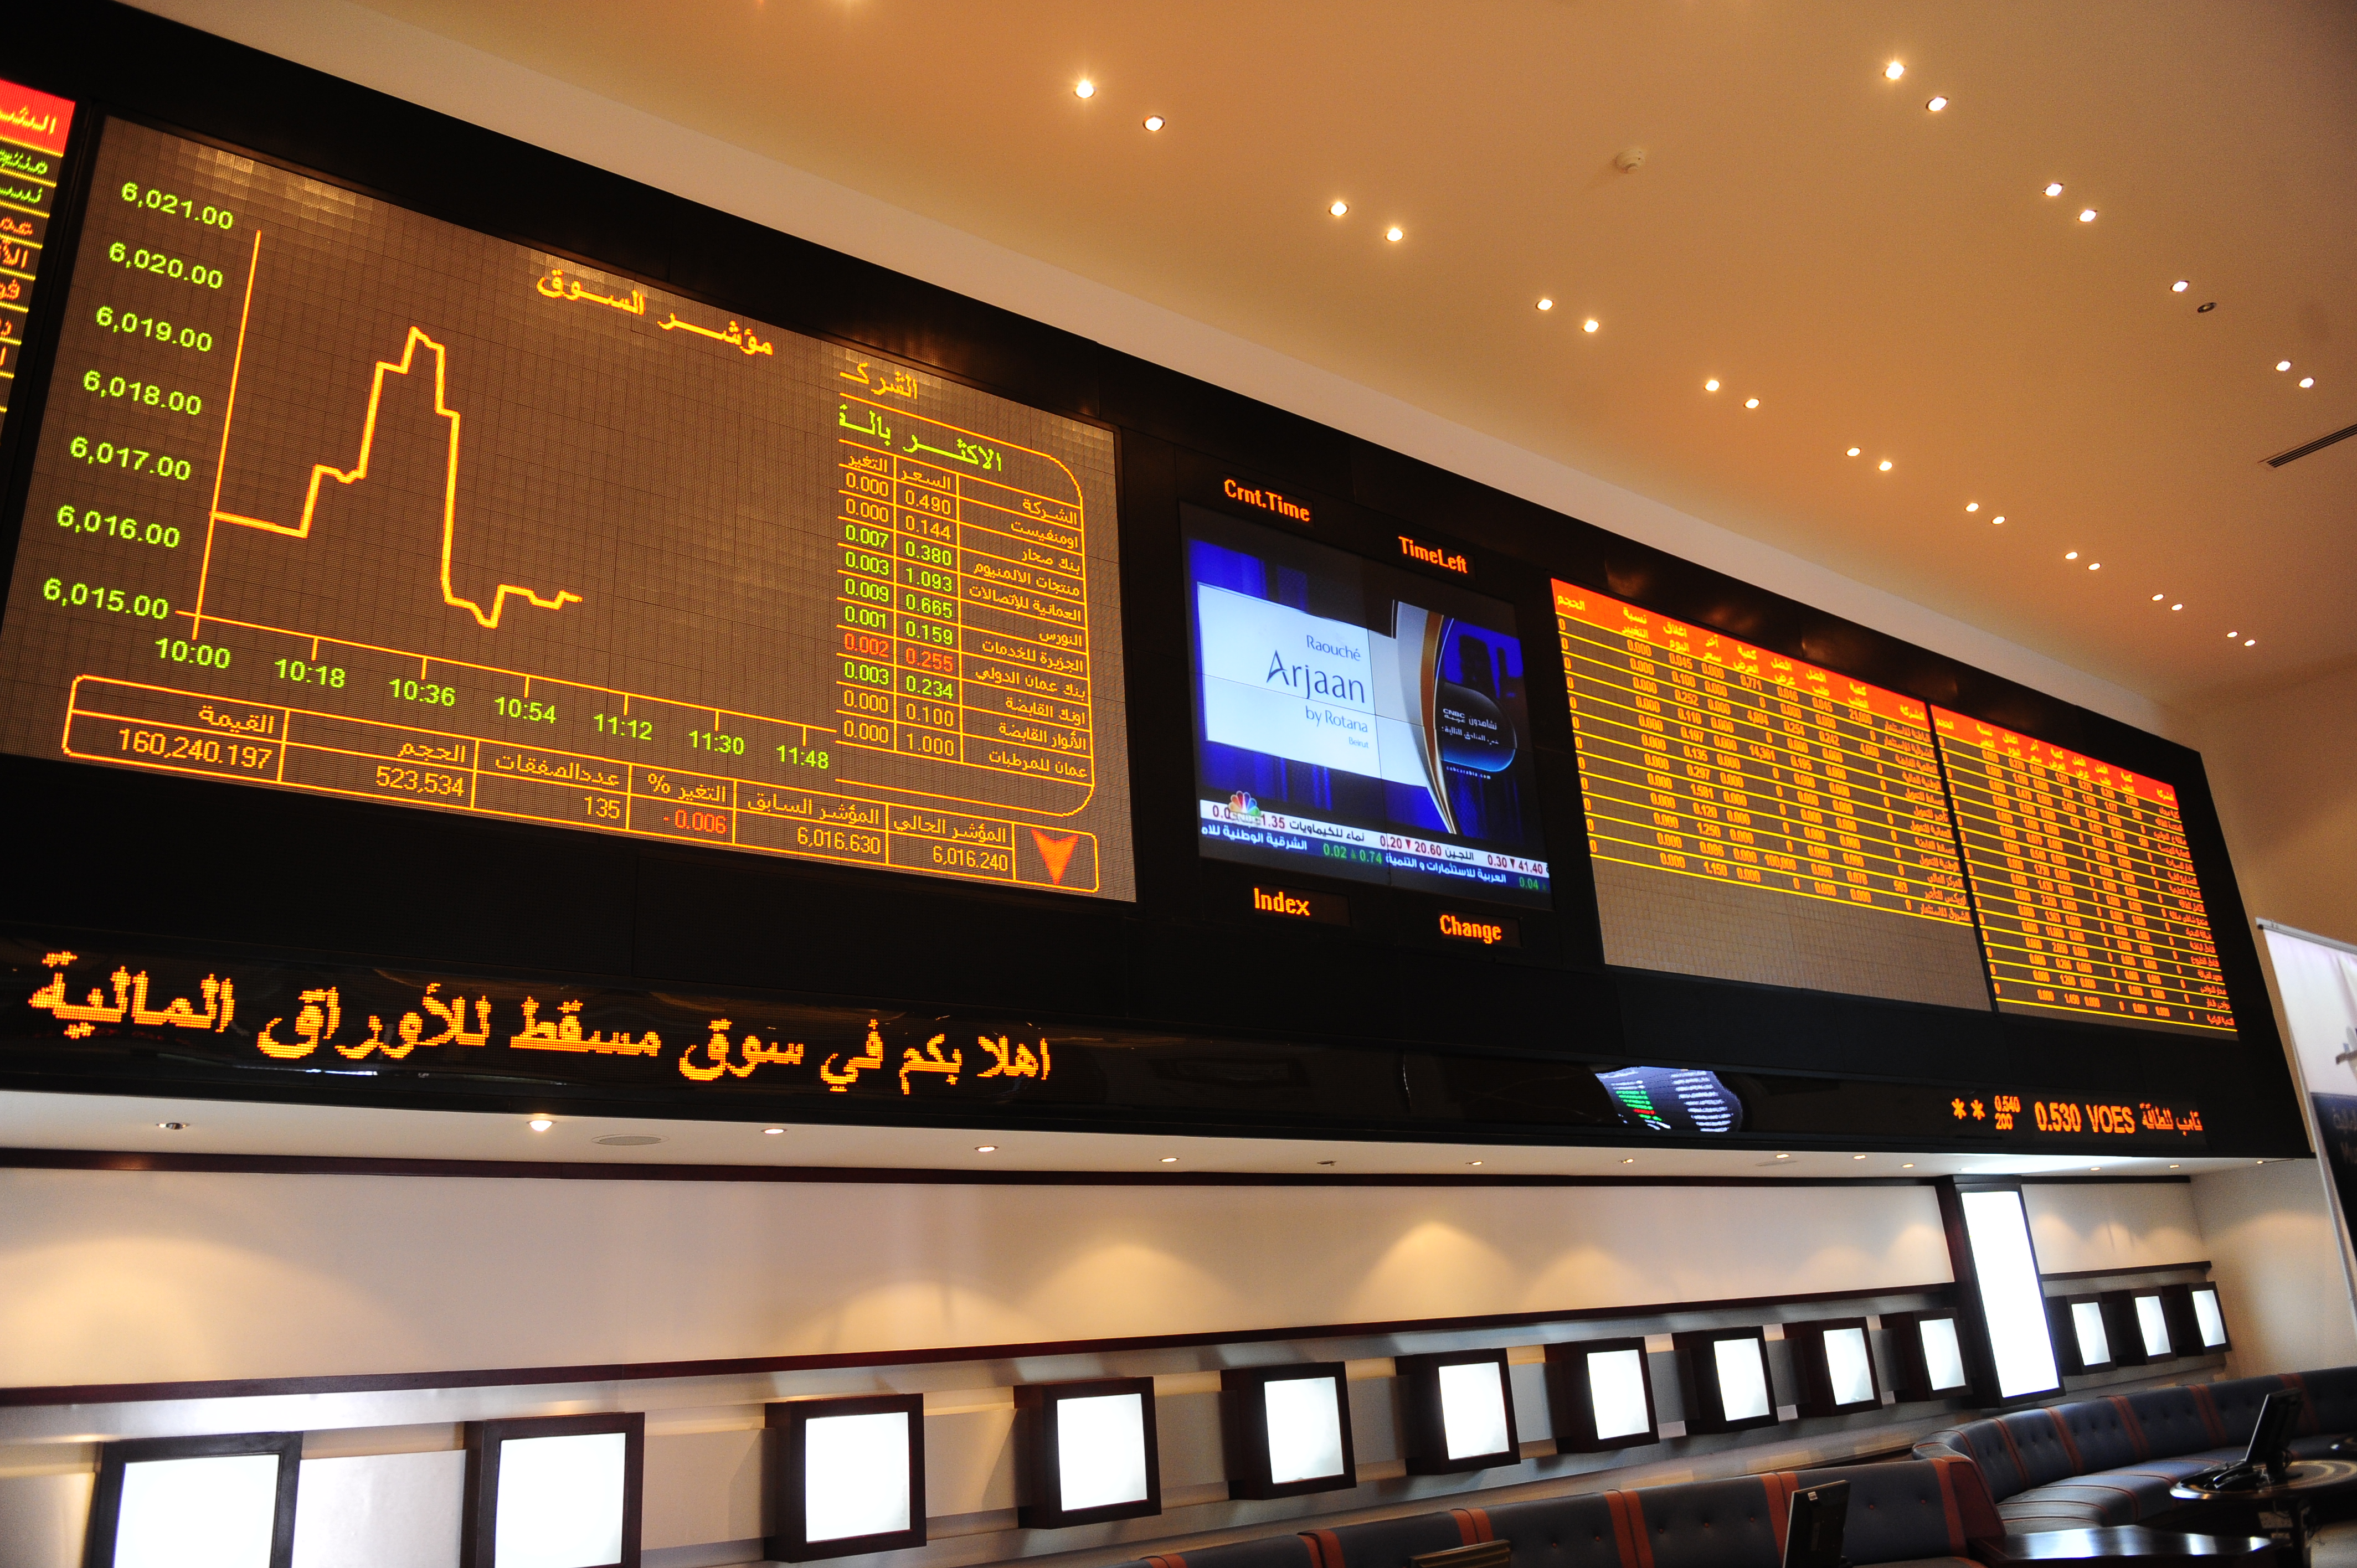 Oman shares rise on gains in banking sector